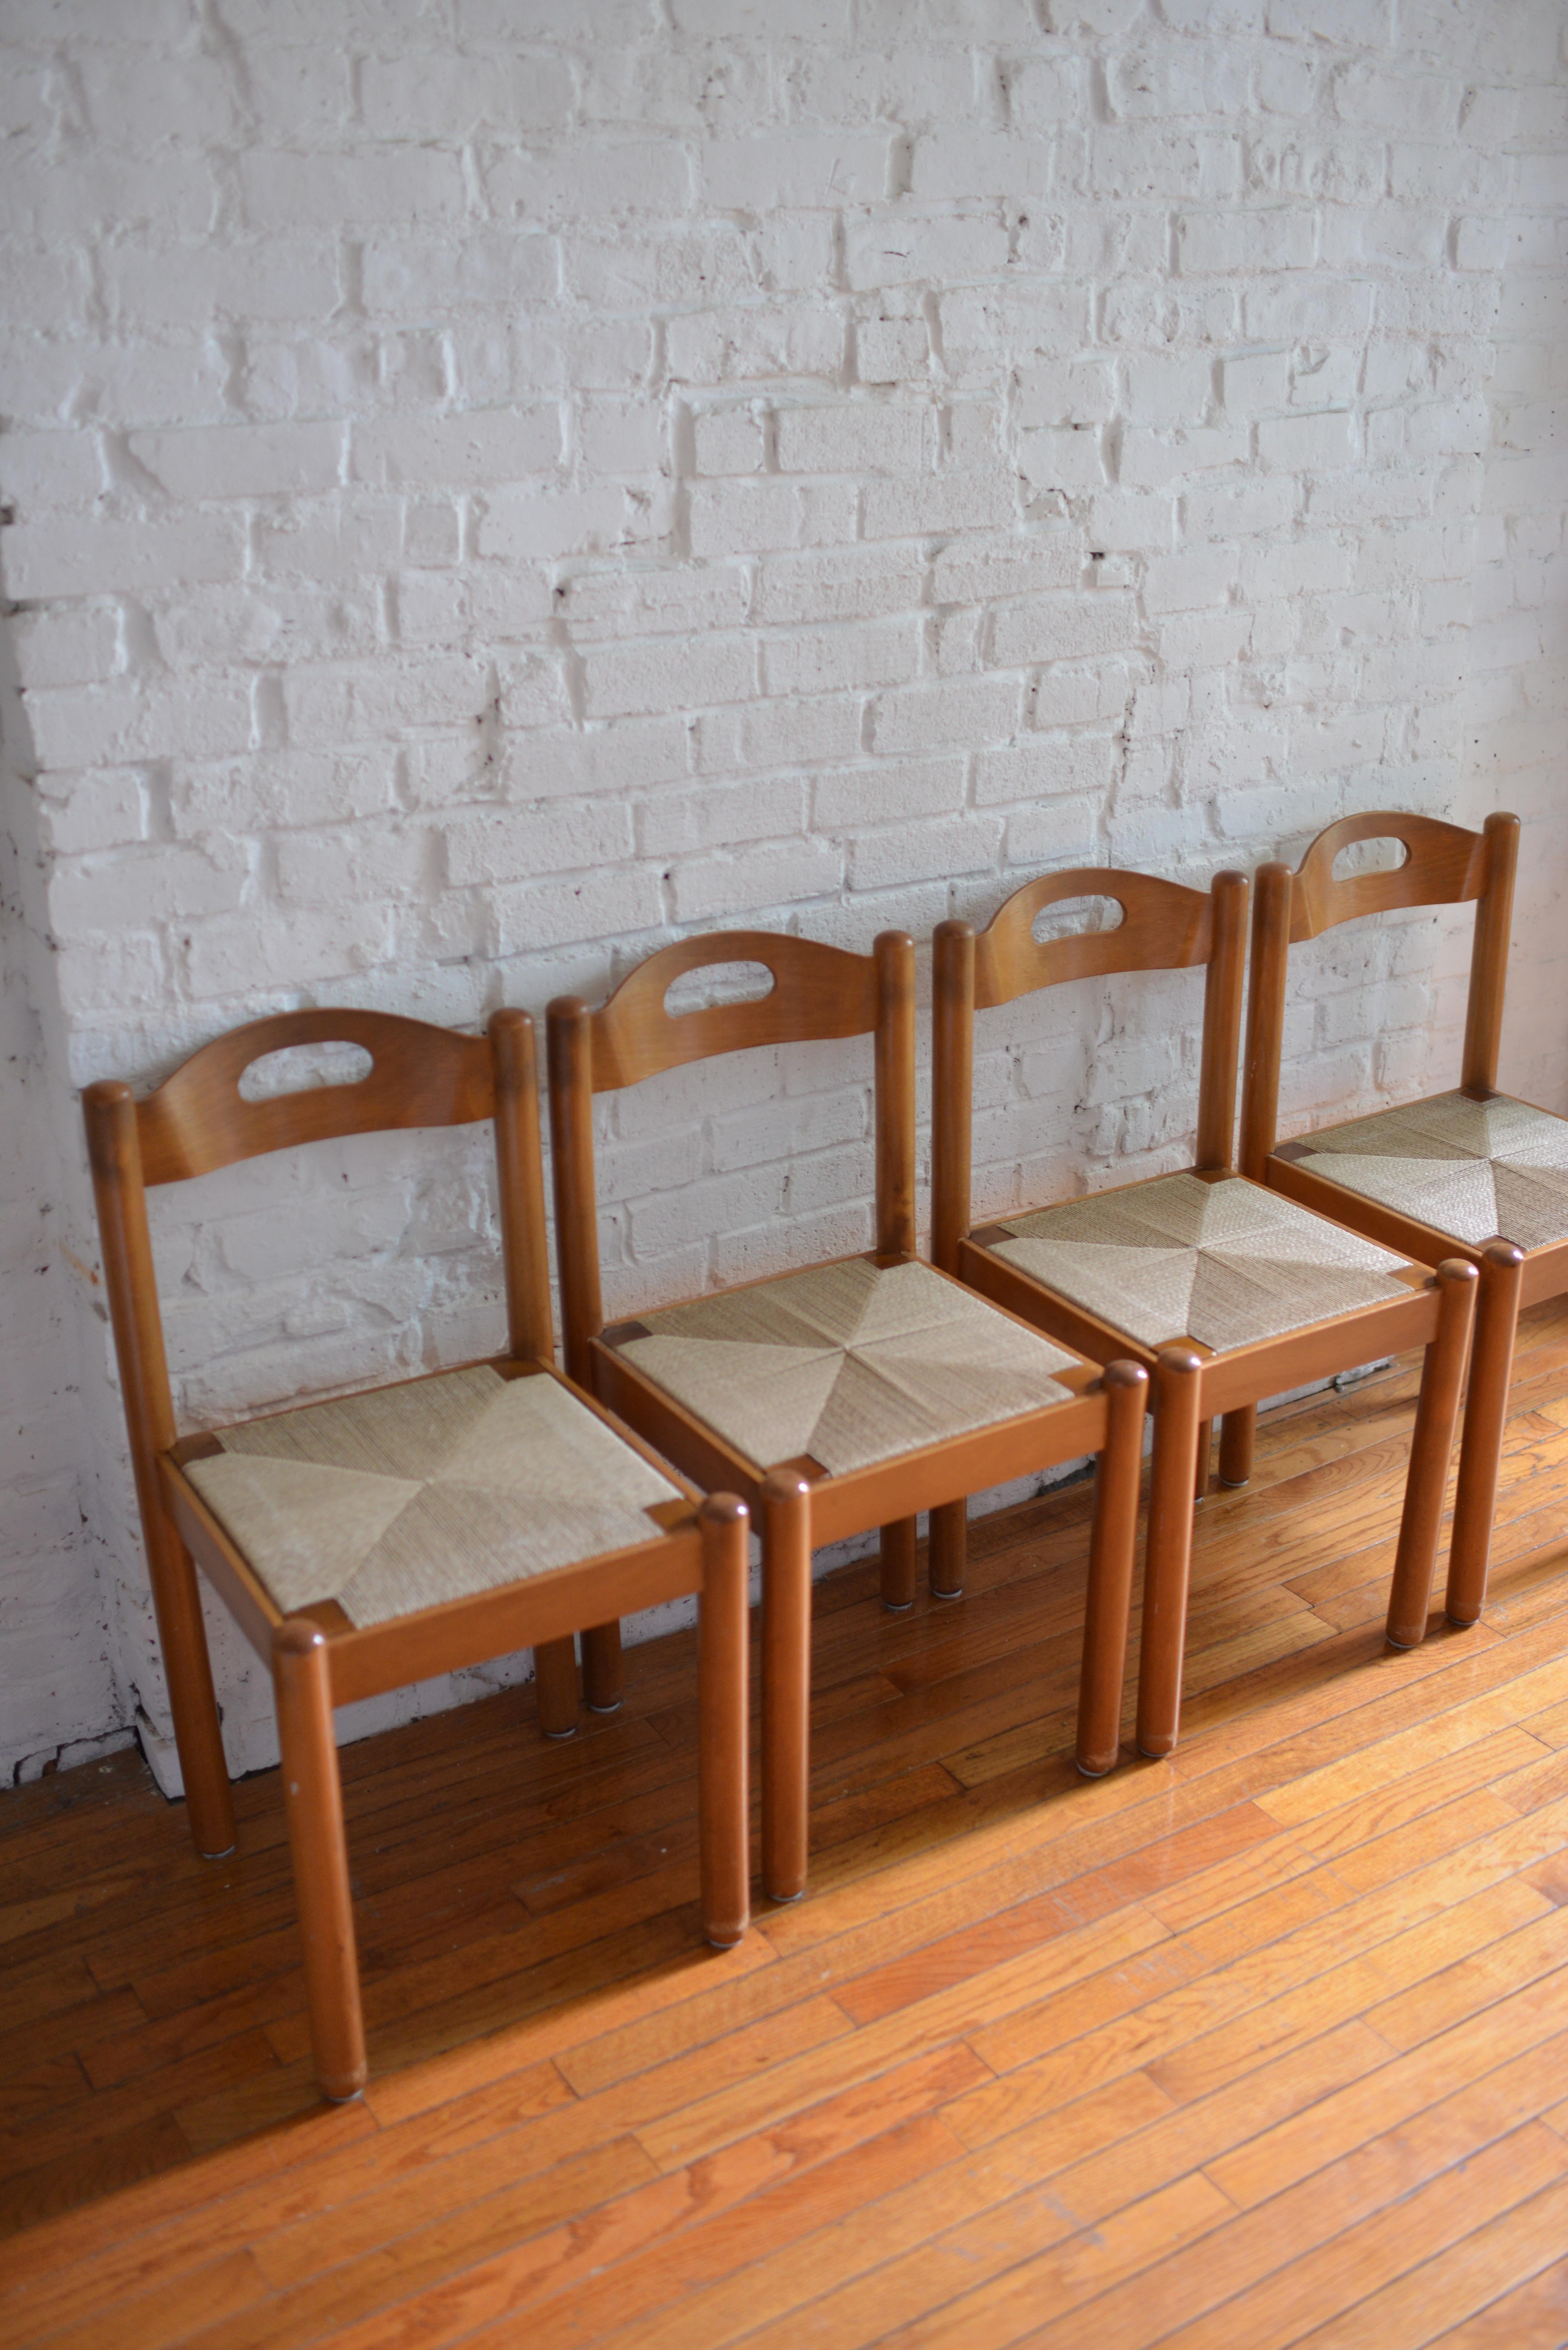 Set of 4 Mid-Century Modern dining chairs in the style of Vico Magistretti. Circular Maple framed and papercord rush woven seats with bent plywood back rests. Solid and sturdy chairs in great vintage condition. Marked 